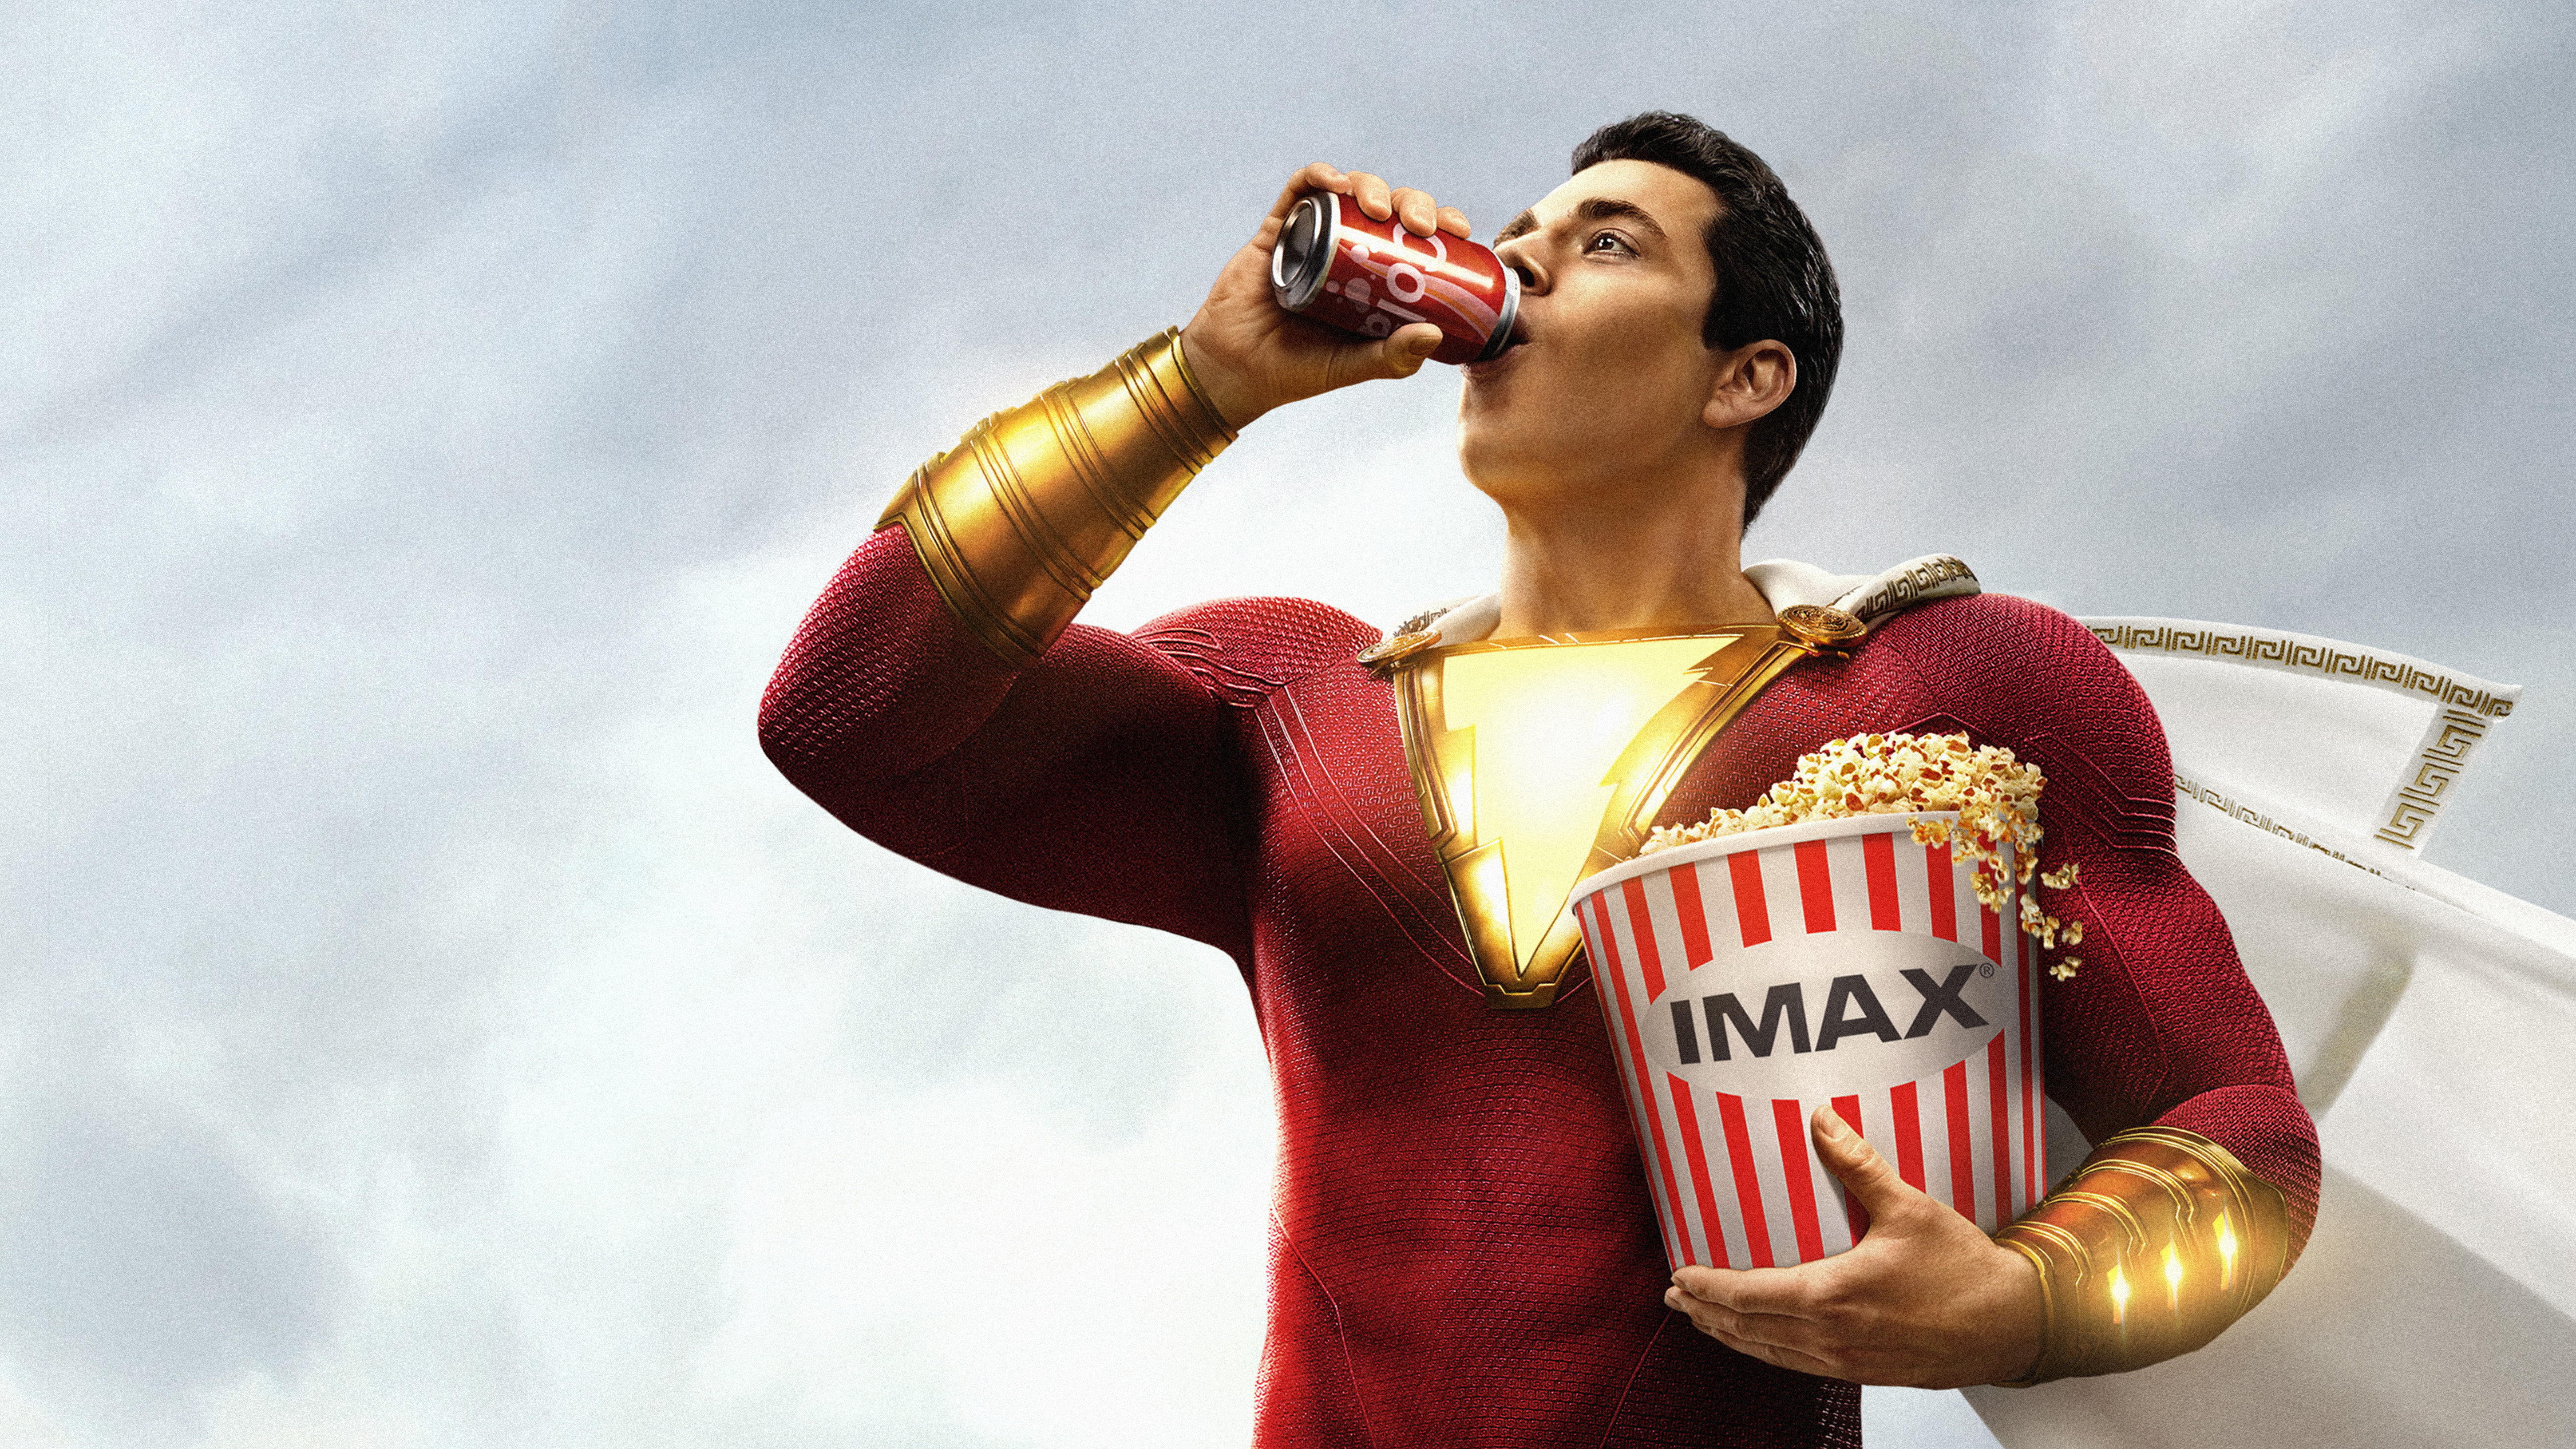 Shazam! exceeds audience expectations with lighthearted 